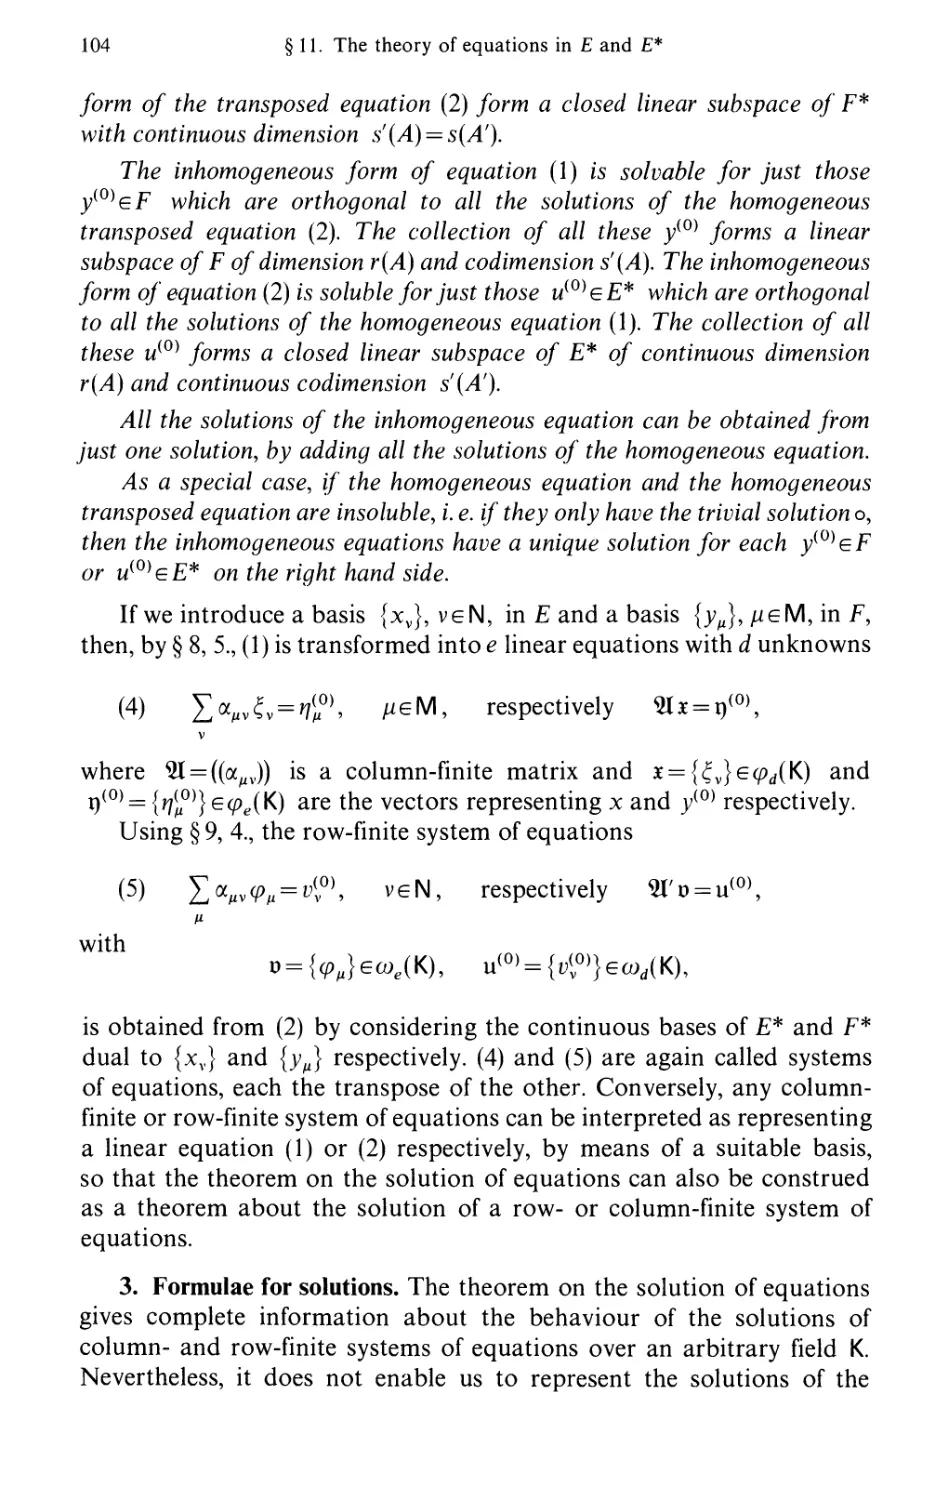 3. Formulae for solutions